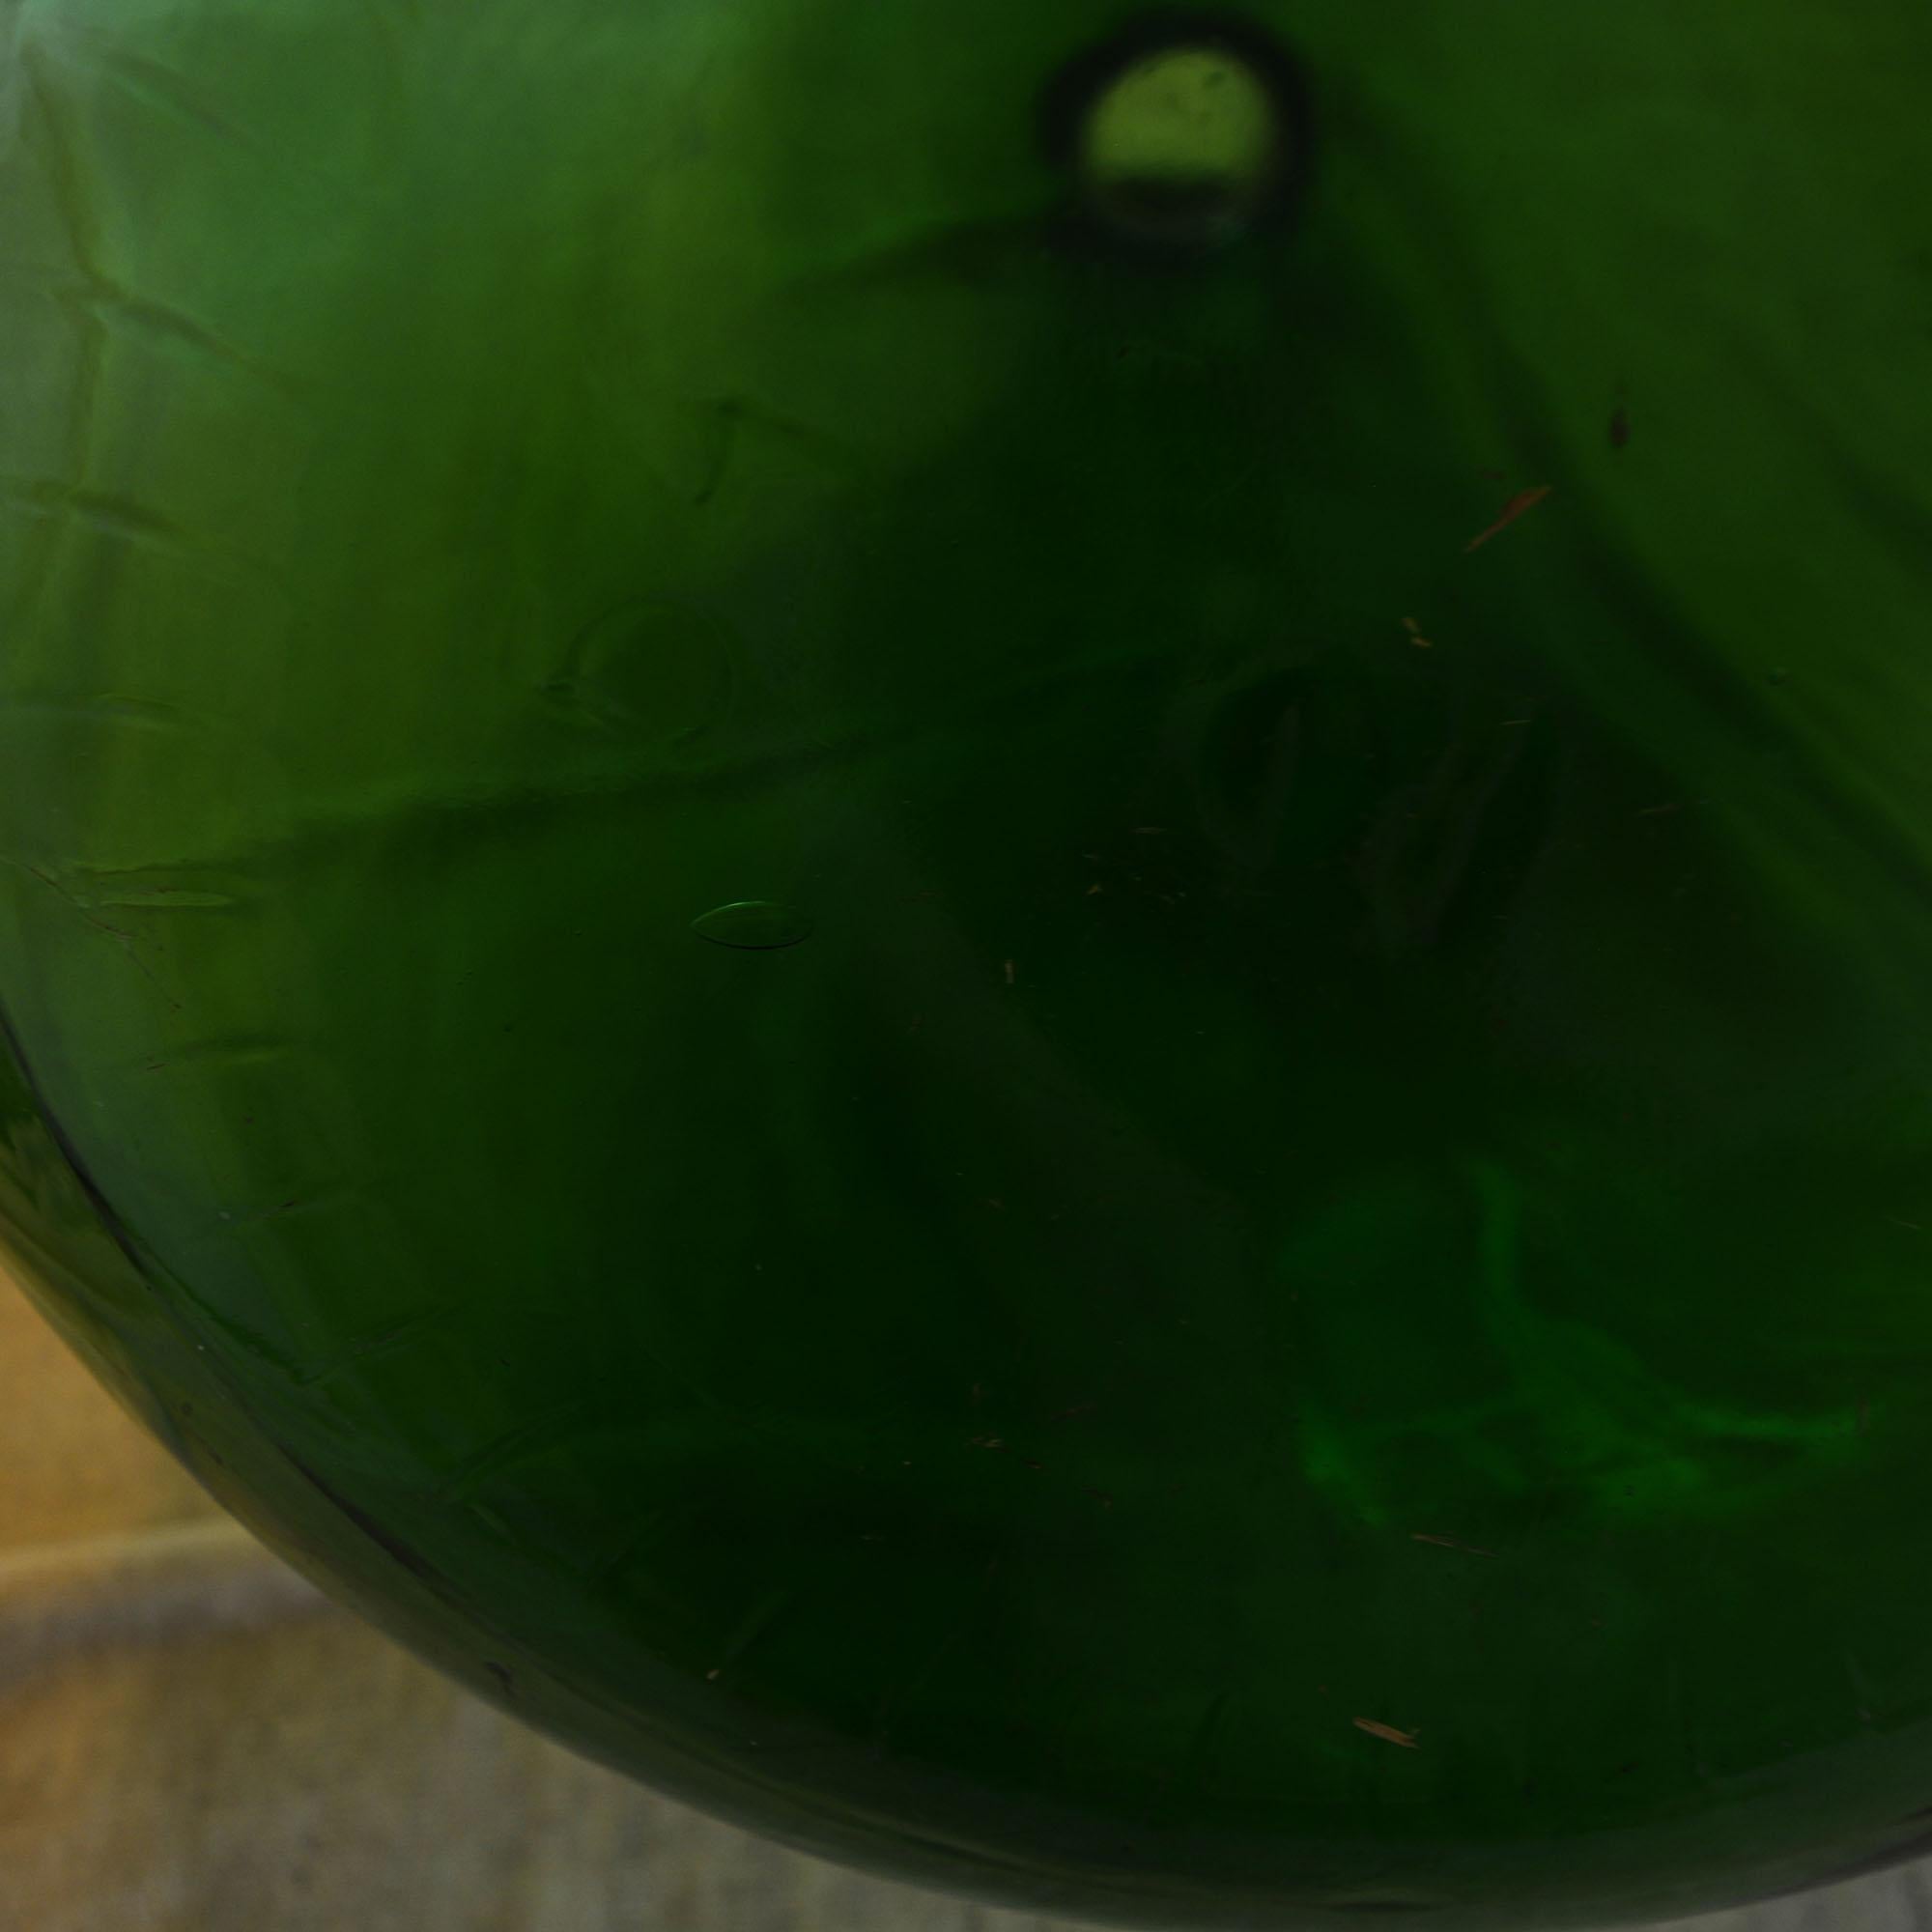 Extra-large, hand blown green glass demijohns from the late 19th century. Near-perfect balloon made of smooth deep-green glass and marked 